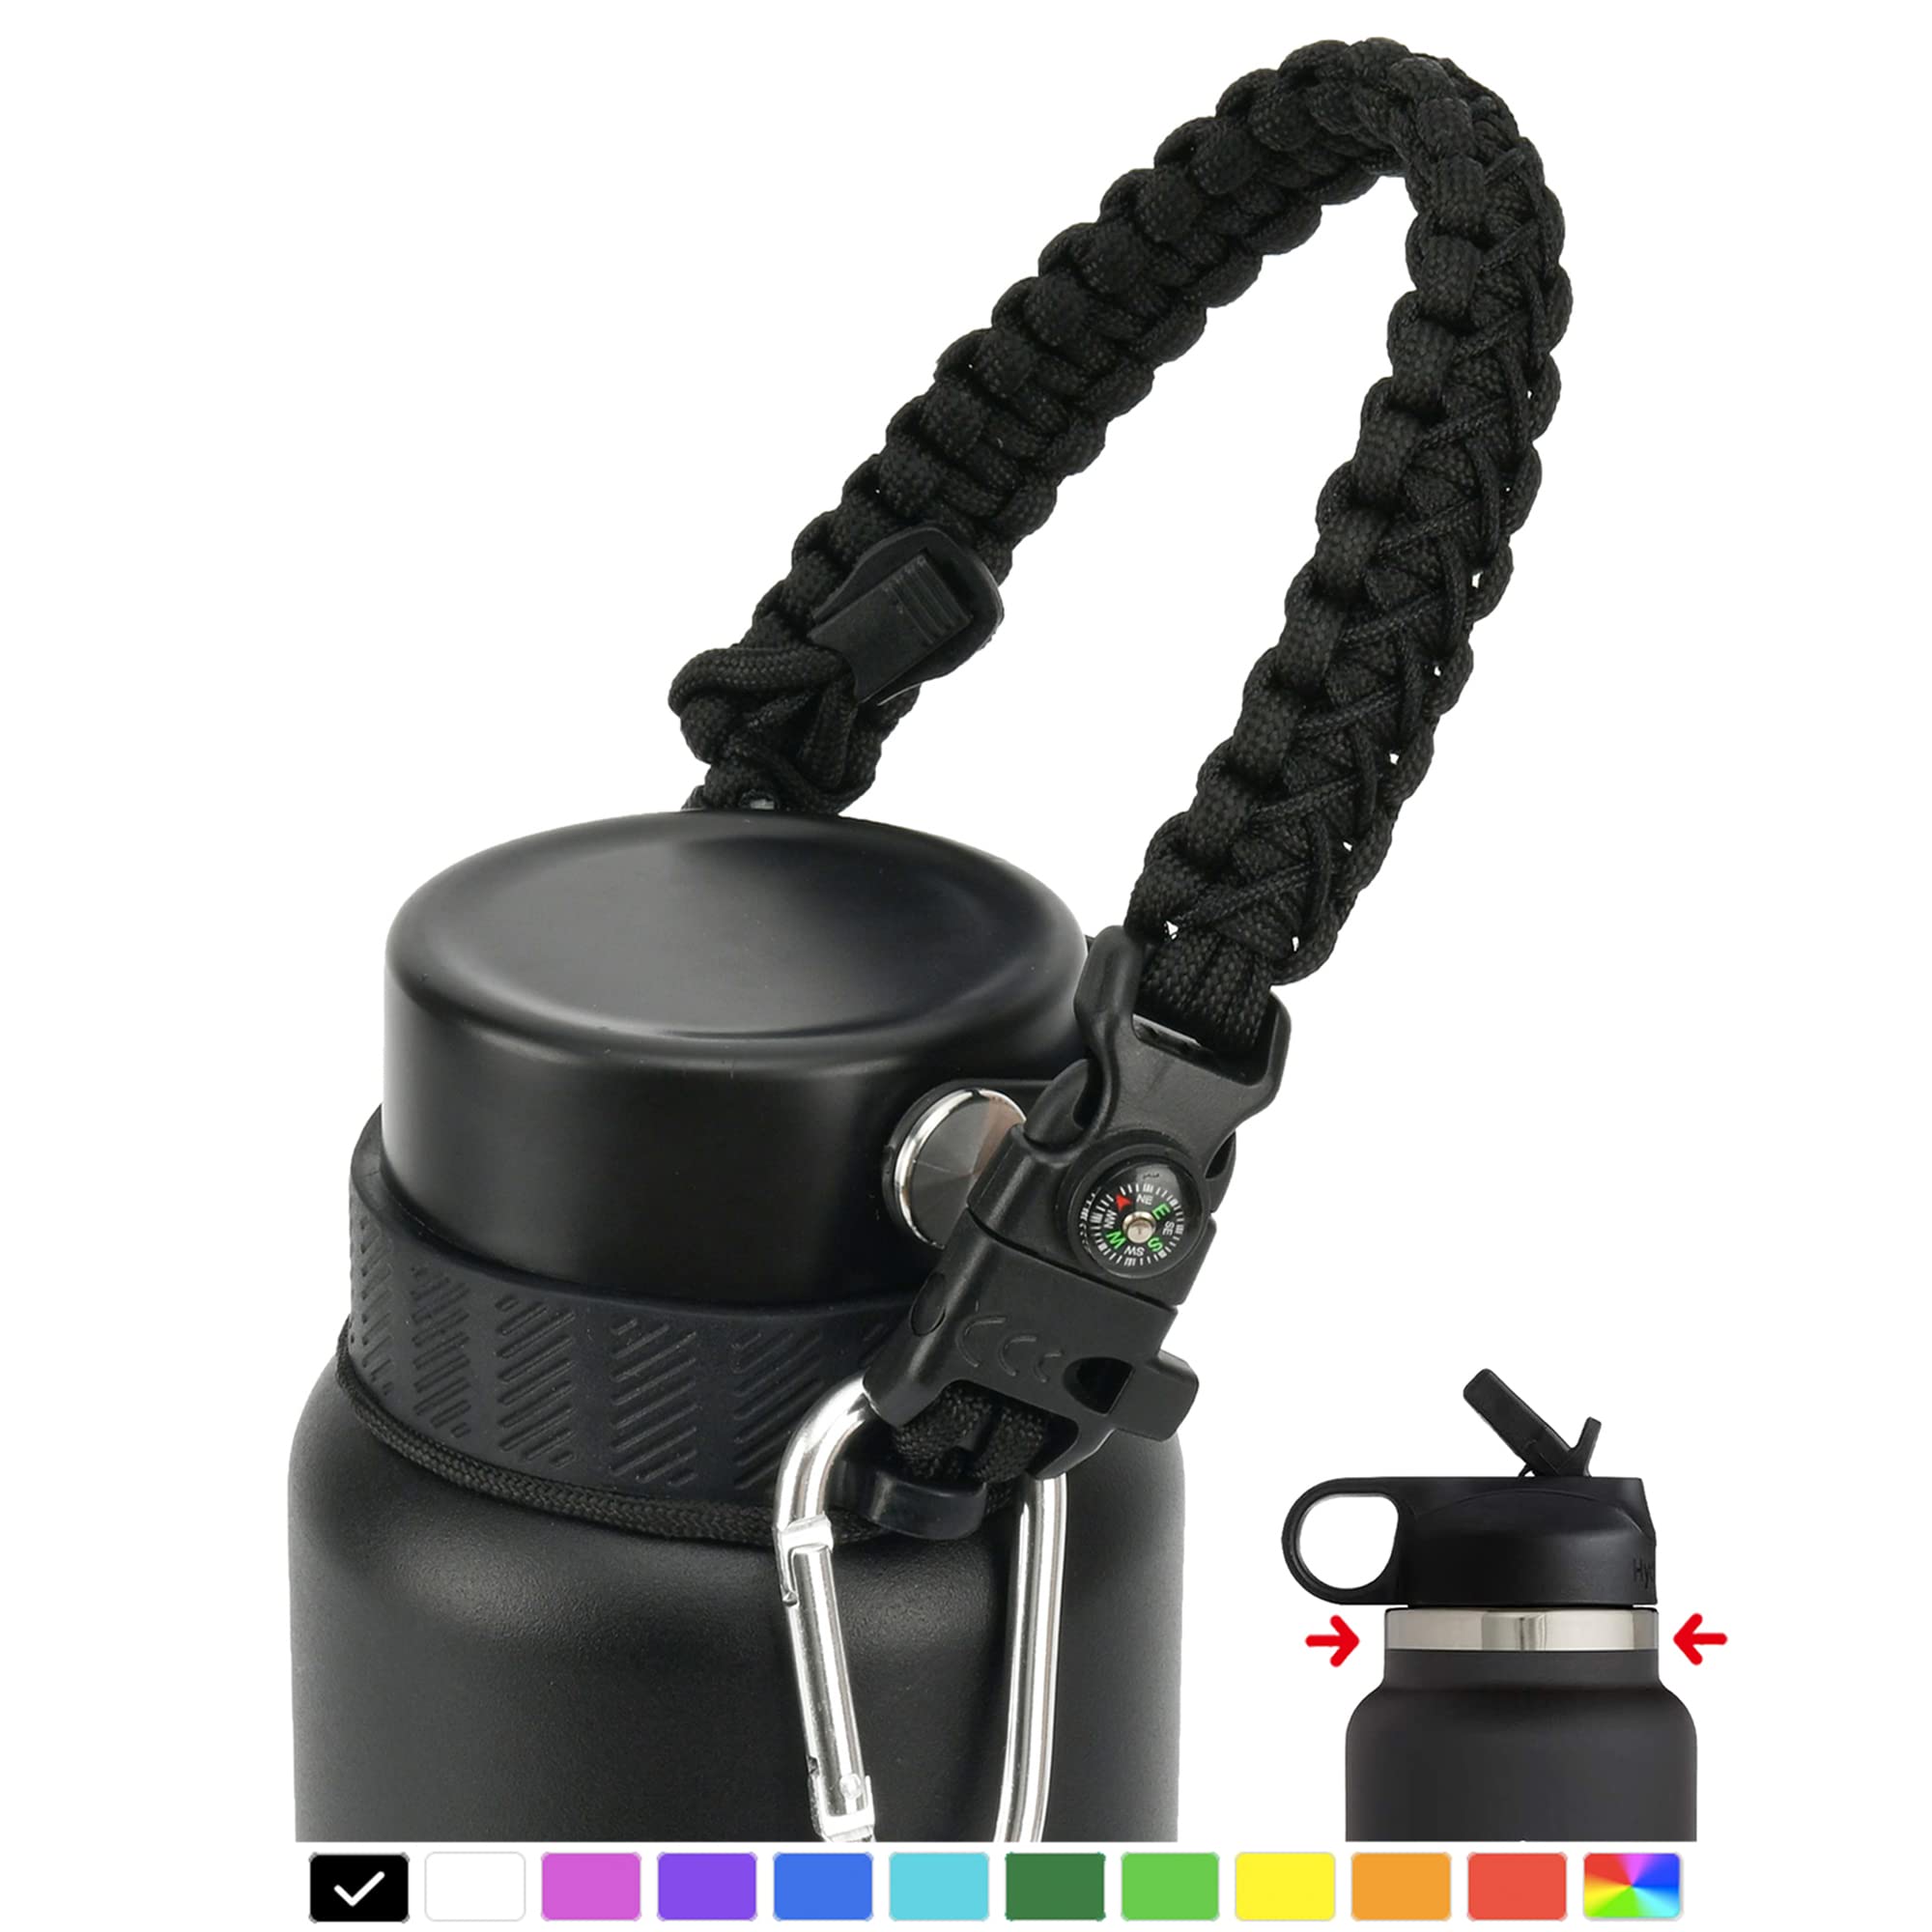 Hydro-flask holster w/ strap